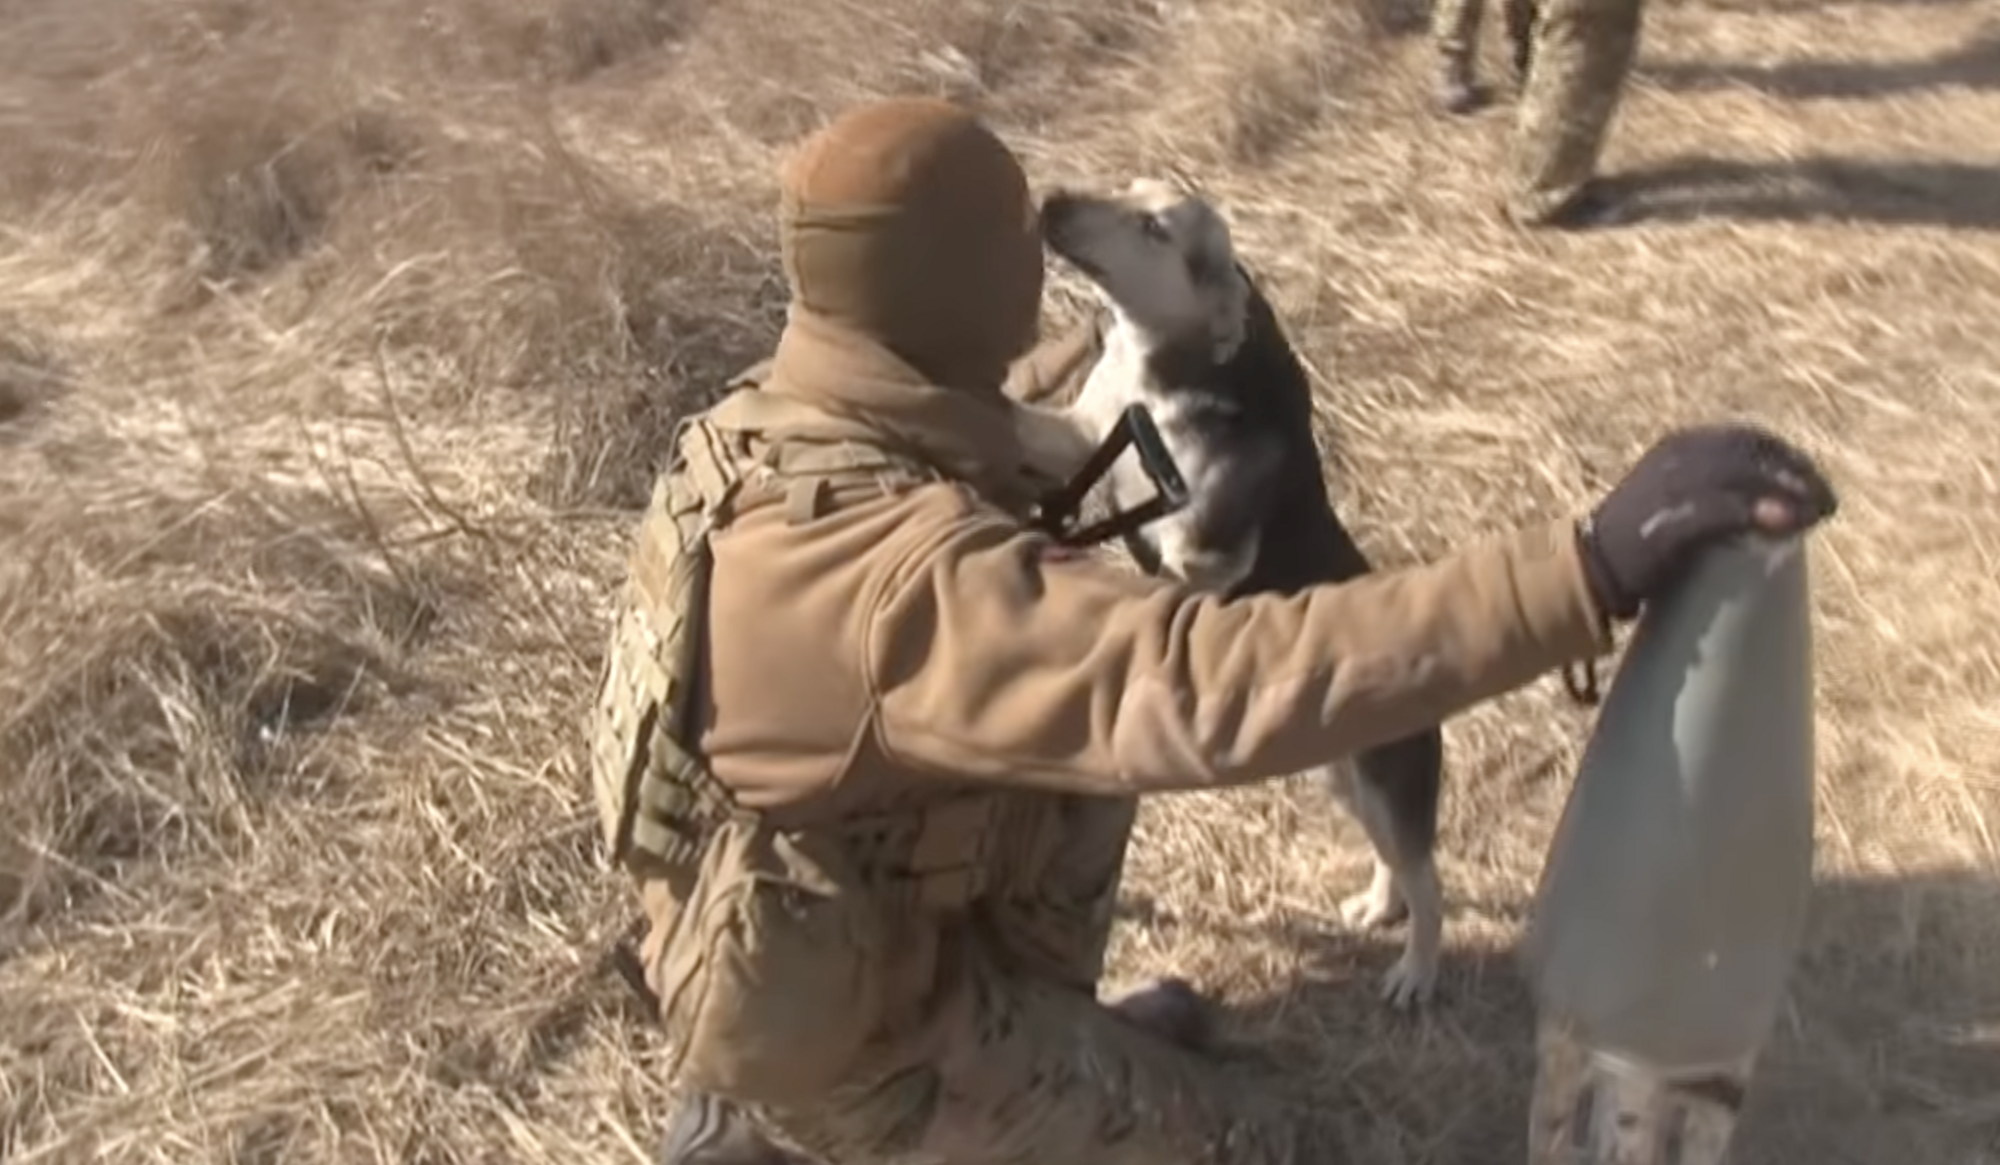 The interview was interrupted by a four-legged warrior